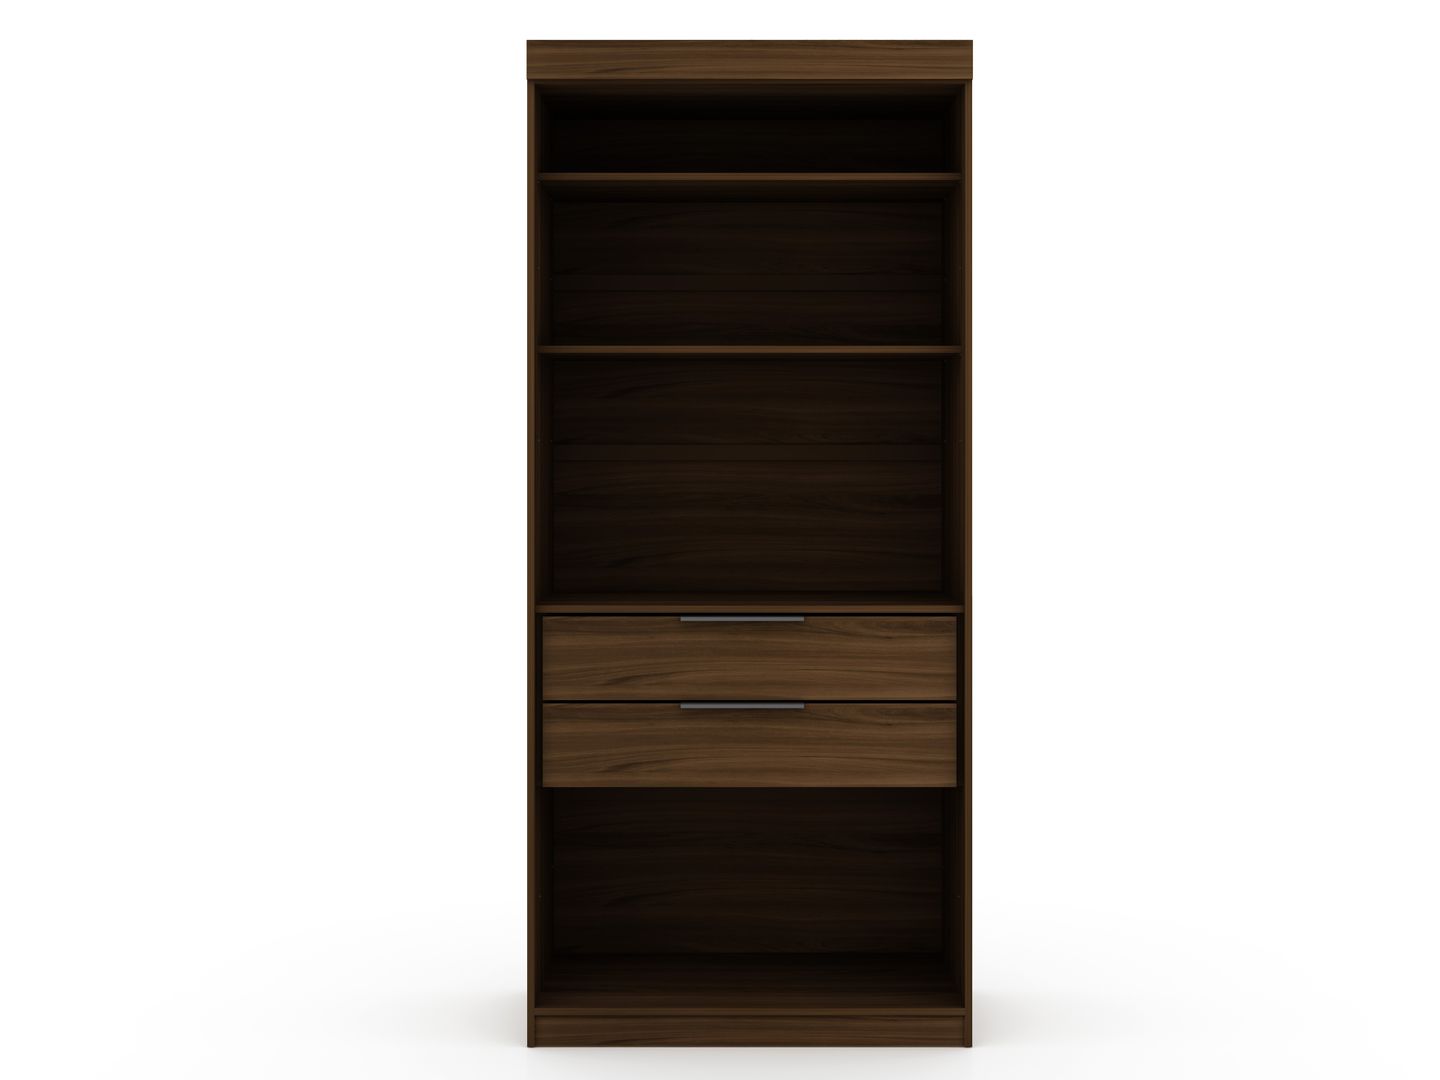 Manhattan Comfort Mulberry Open 1 Sectional Modern Armoire Wardrobe Closet with 2 Drawers in BrownManhattan Comfort-Armoires and Wardrobes - - 1